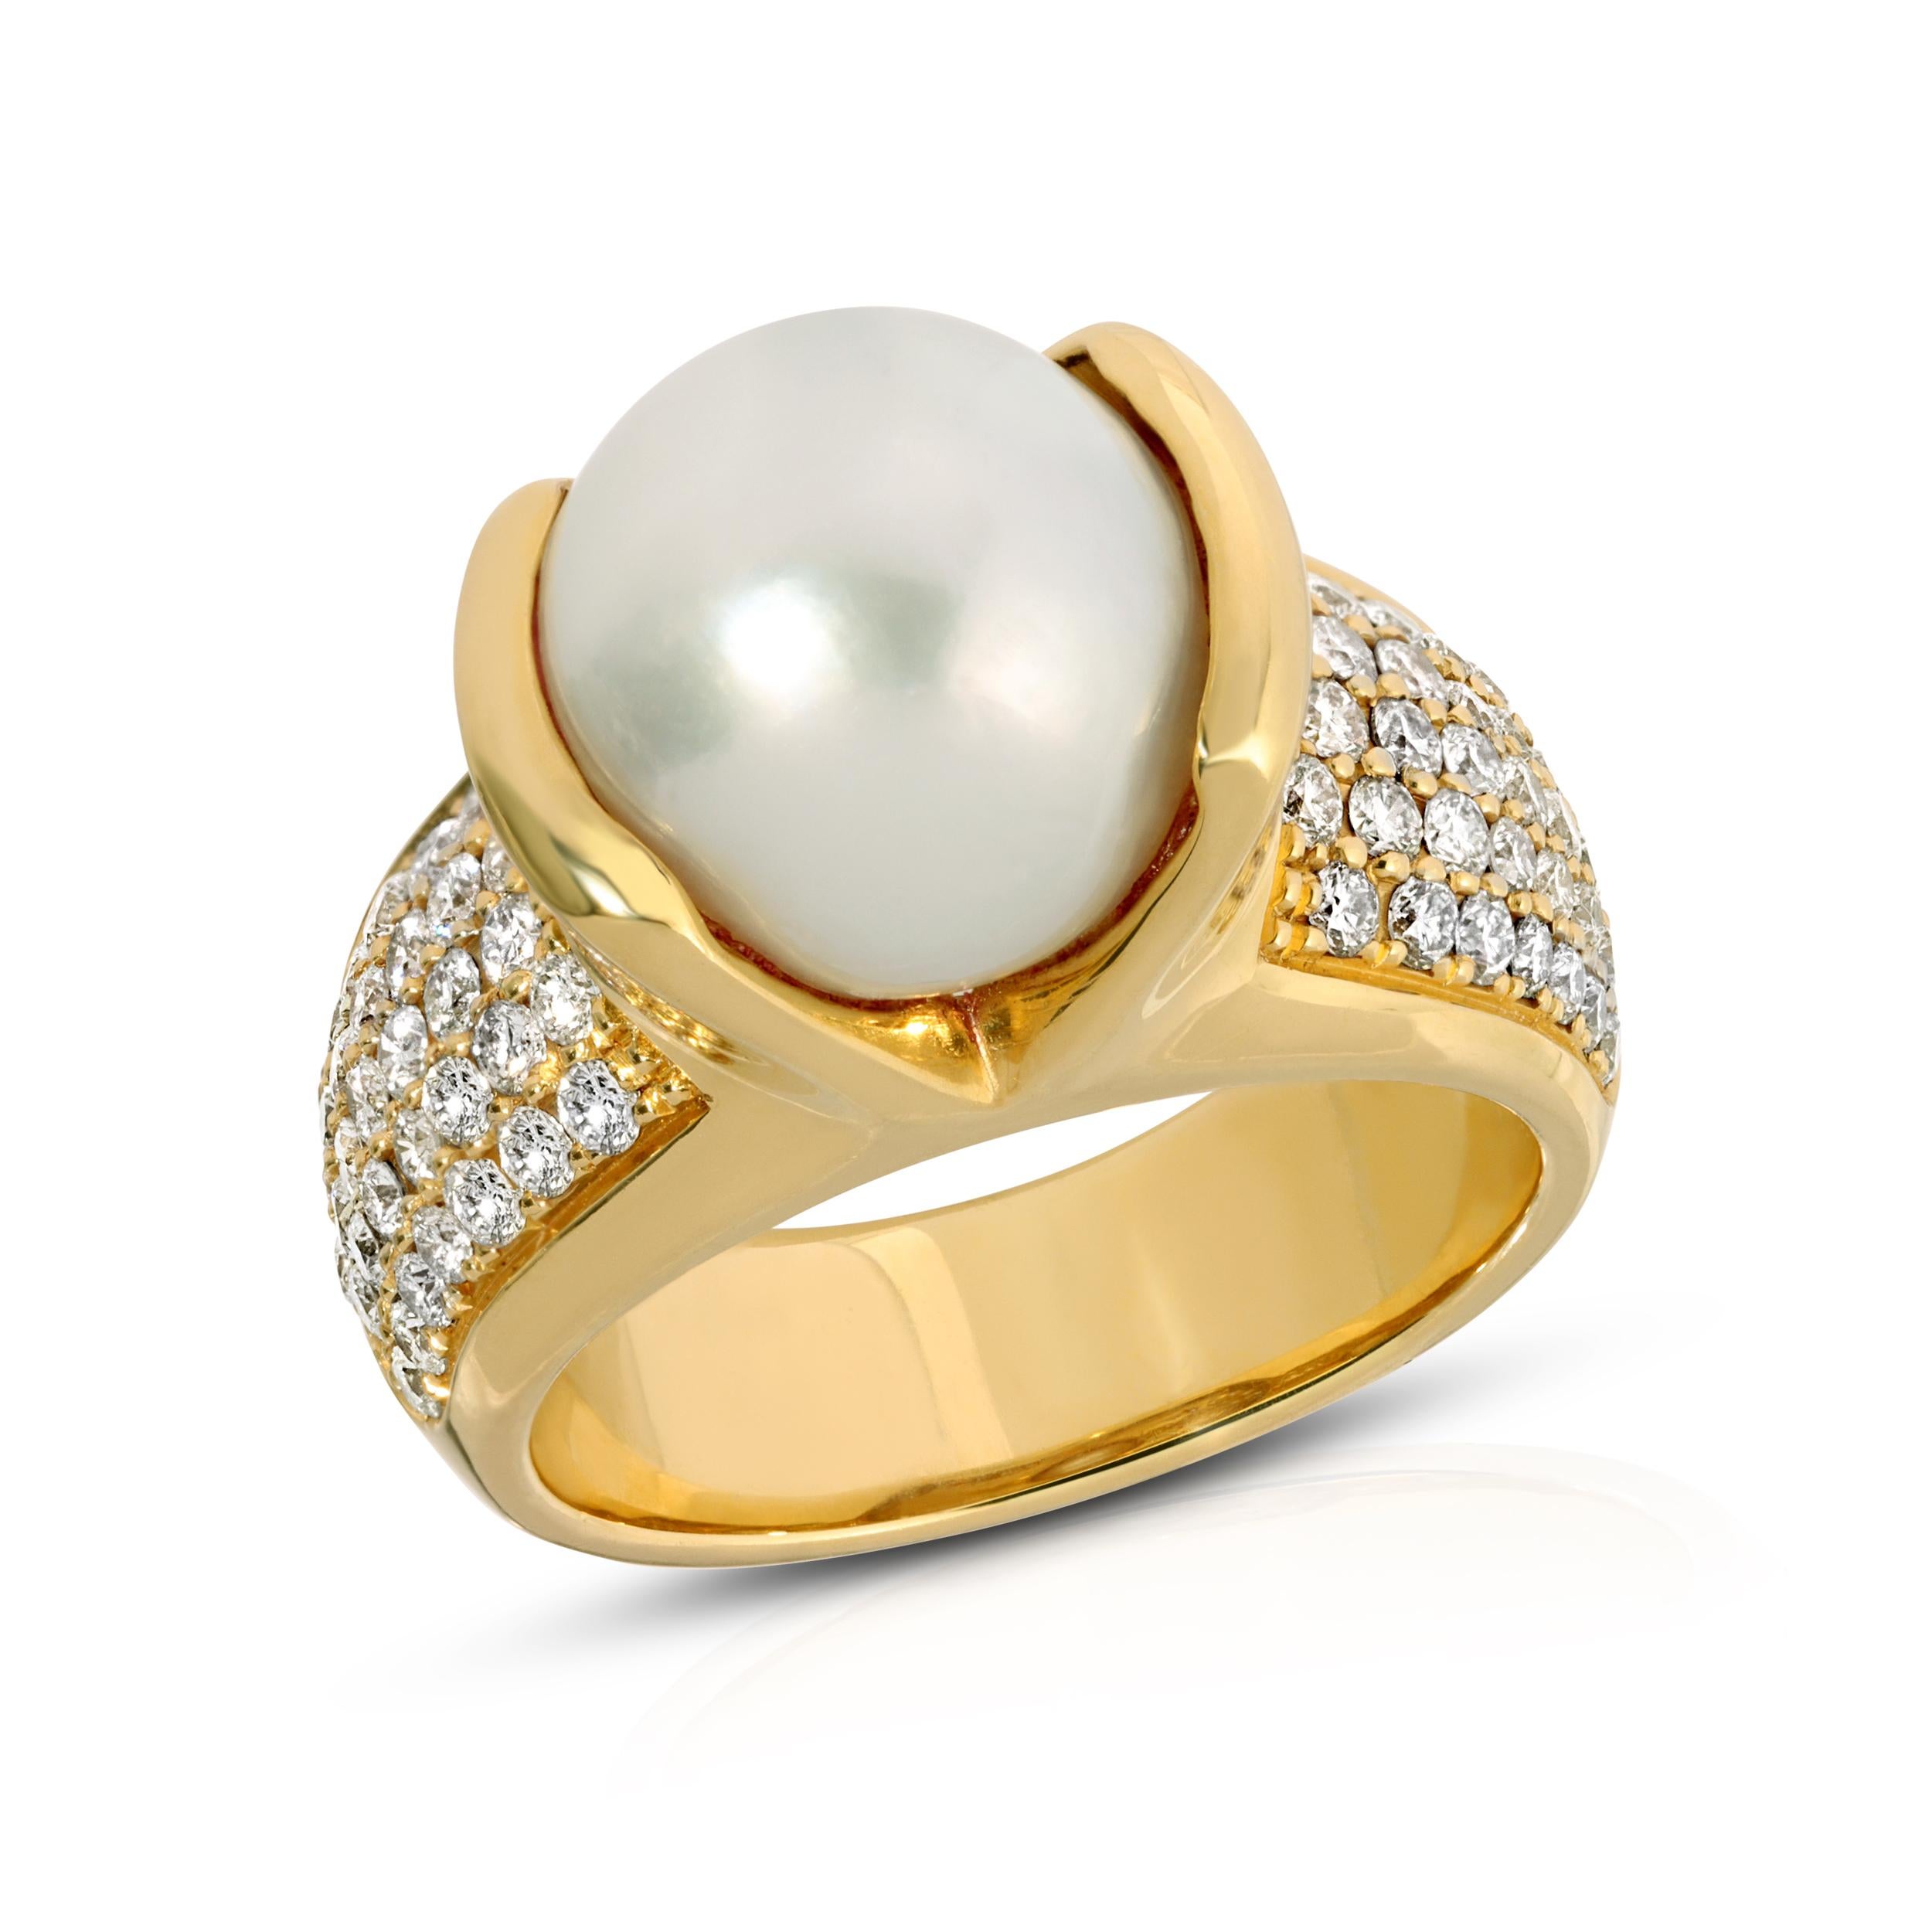 14k yellow gold open bezel ring, with cultured pearl and diamond shoulders.

House of RAVN hand carved BELLA statement ring. This unique open bezel white cultured pearl ring with packed diamond shoulders is an elegant show stopper. 